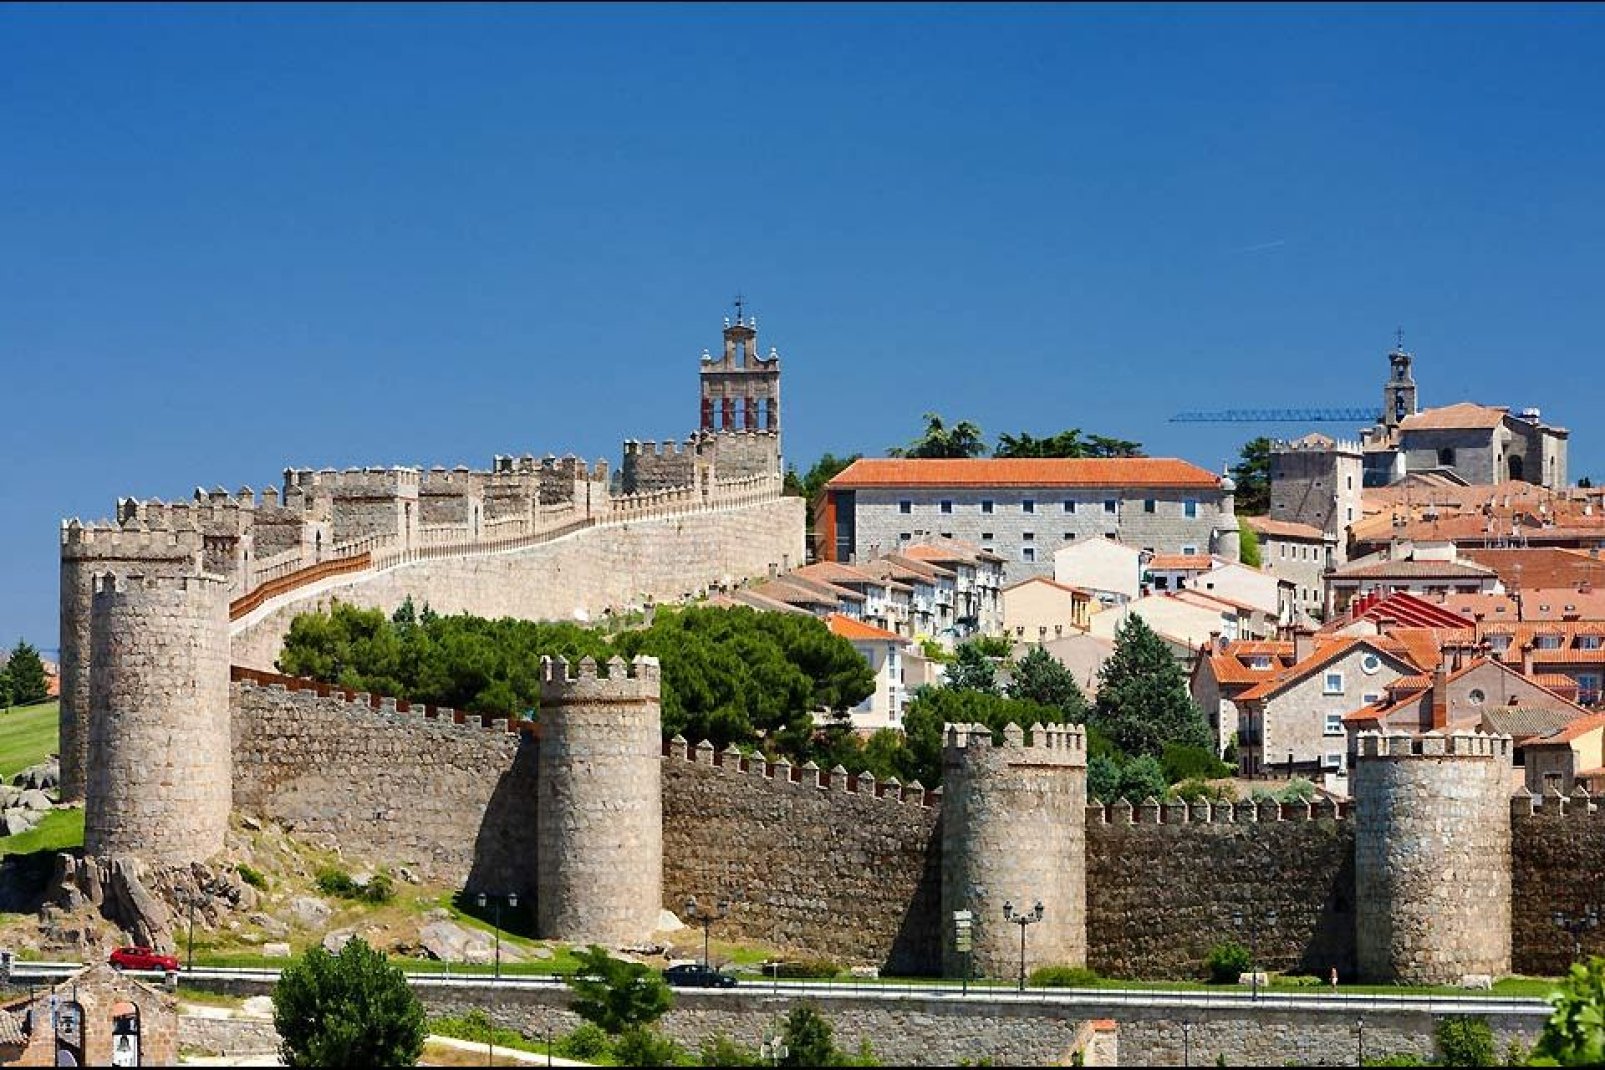 The entire city is surrounded by this fortified medieval wall dating from the 11th century. It is made up of 88 towers.